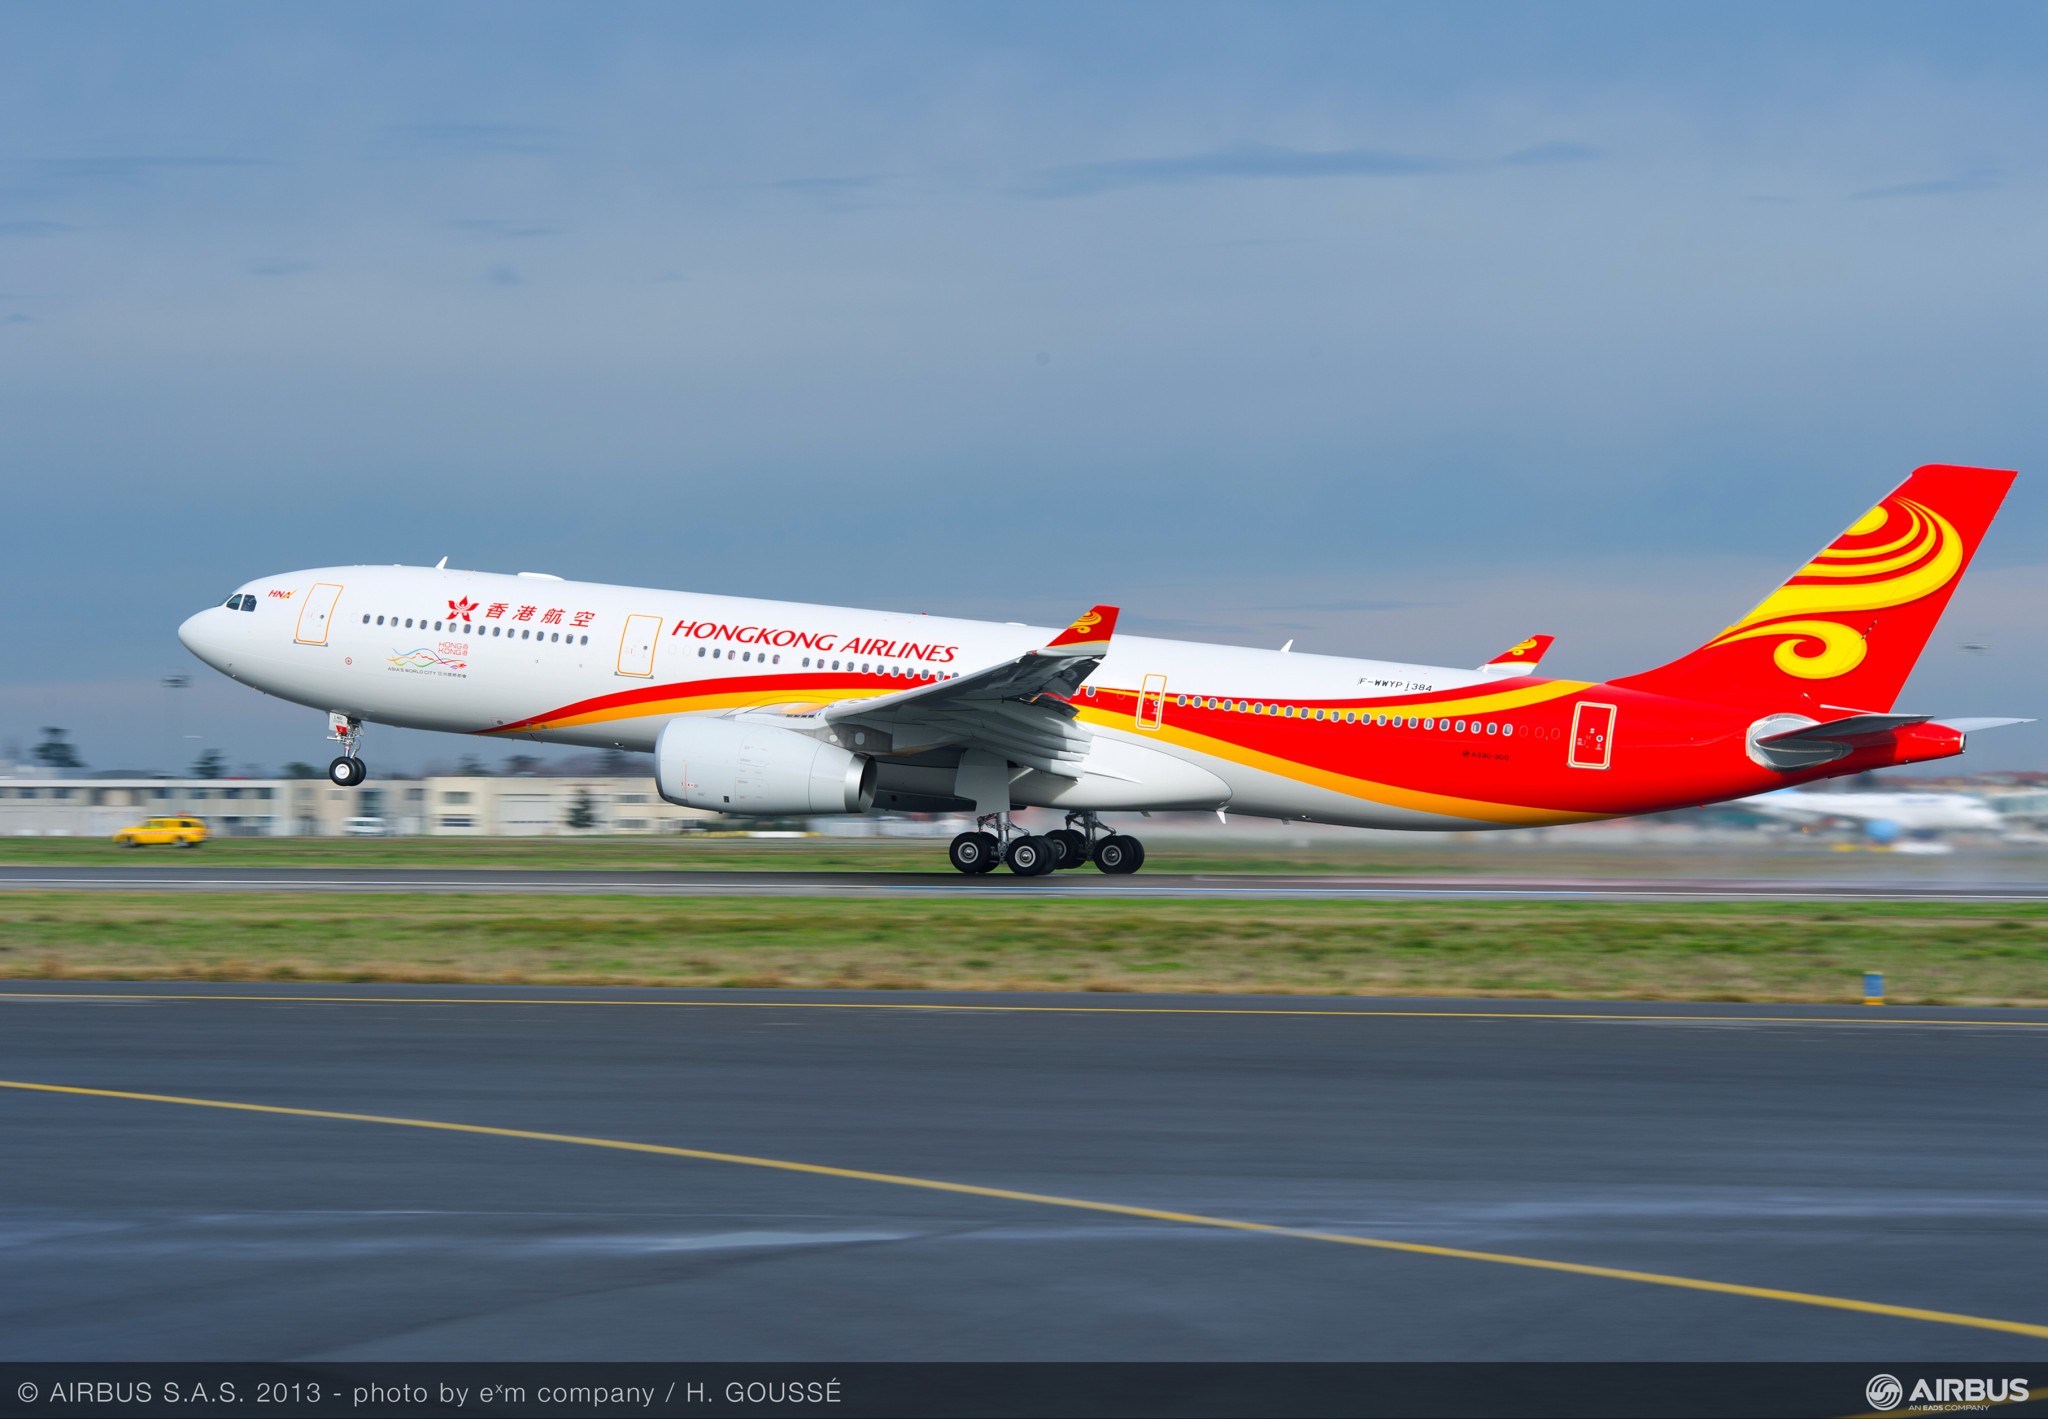 Hong Kong Airlines pulls out of North American market